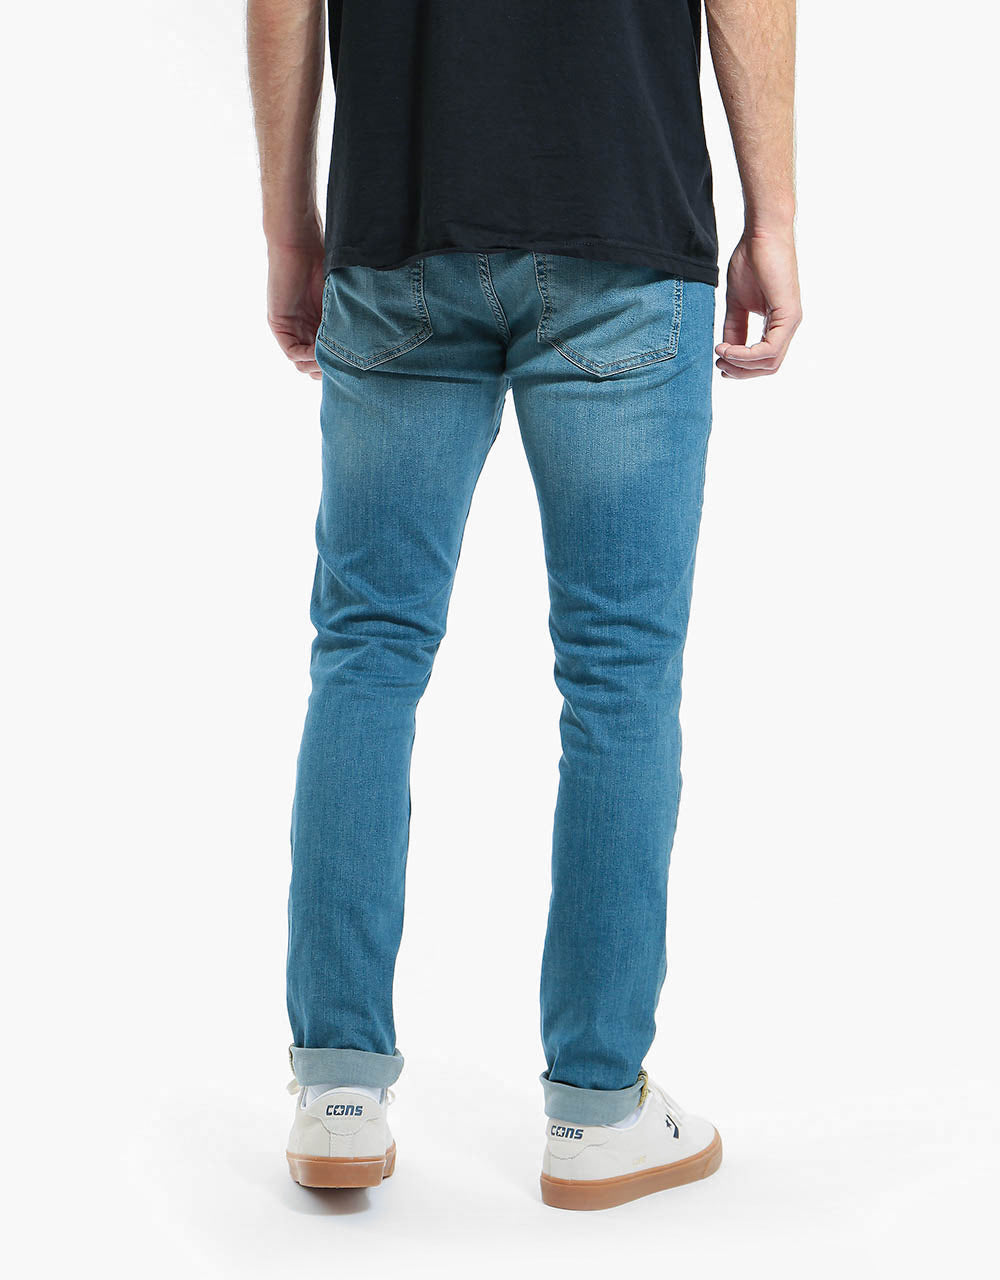 Route One Skinny Denim Jeans - Washed Blue